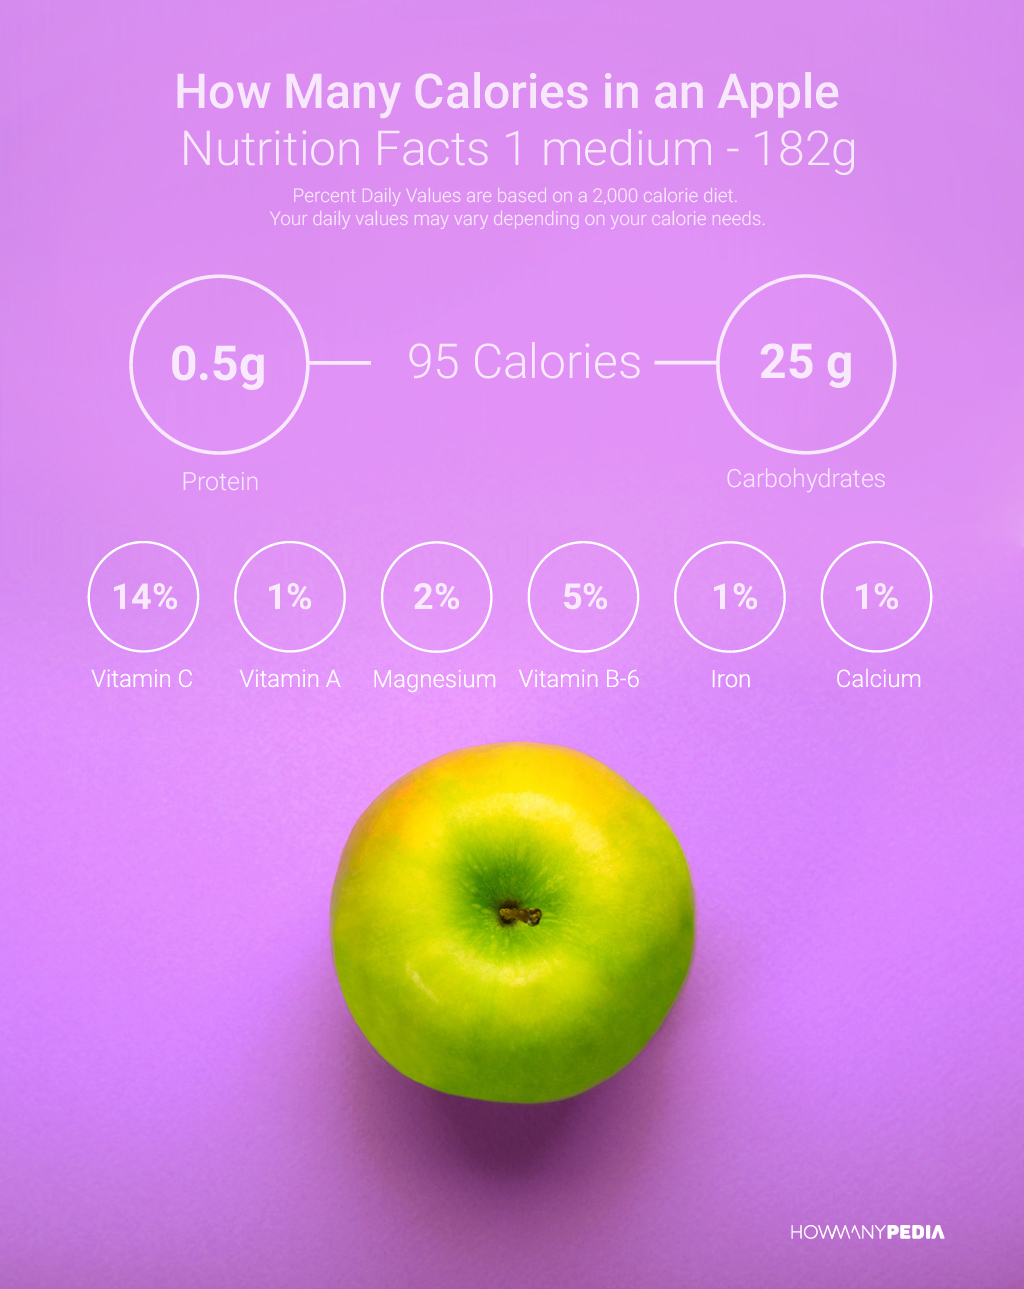 How Many Calories in an Apple Nutrition Facts